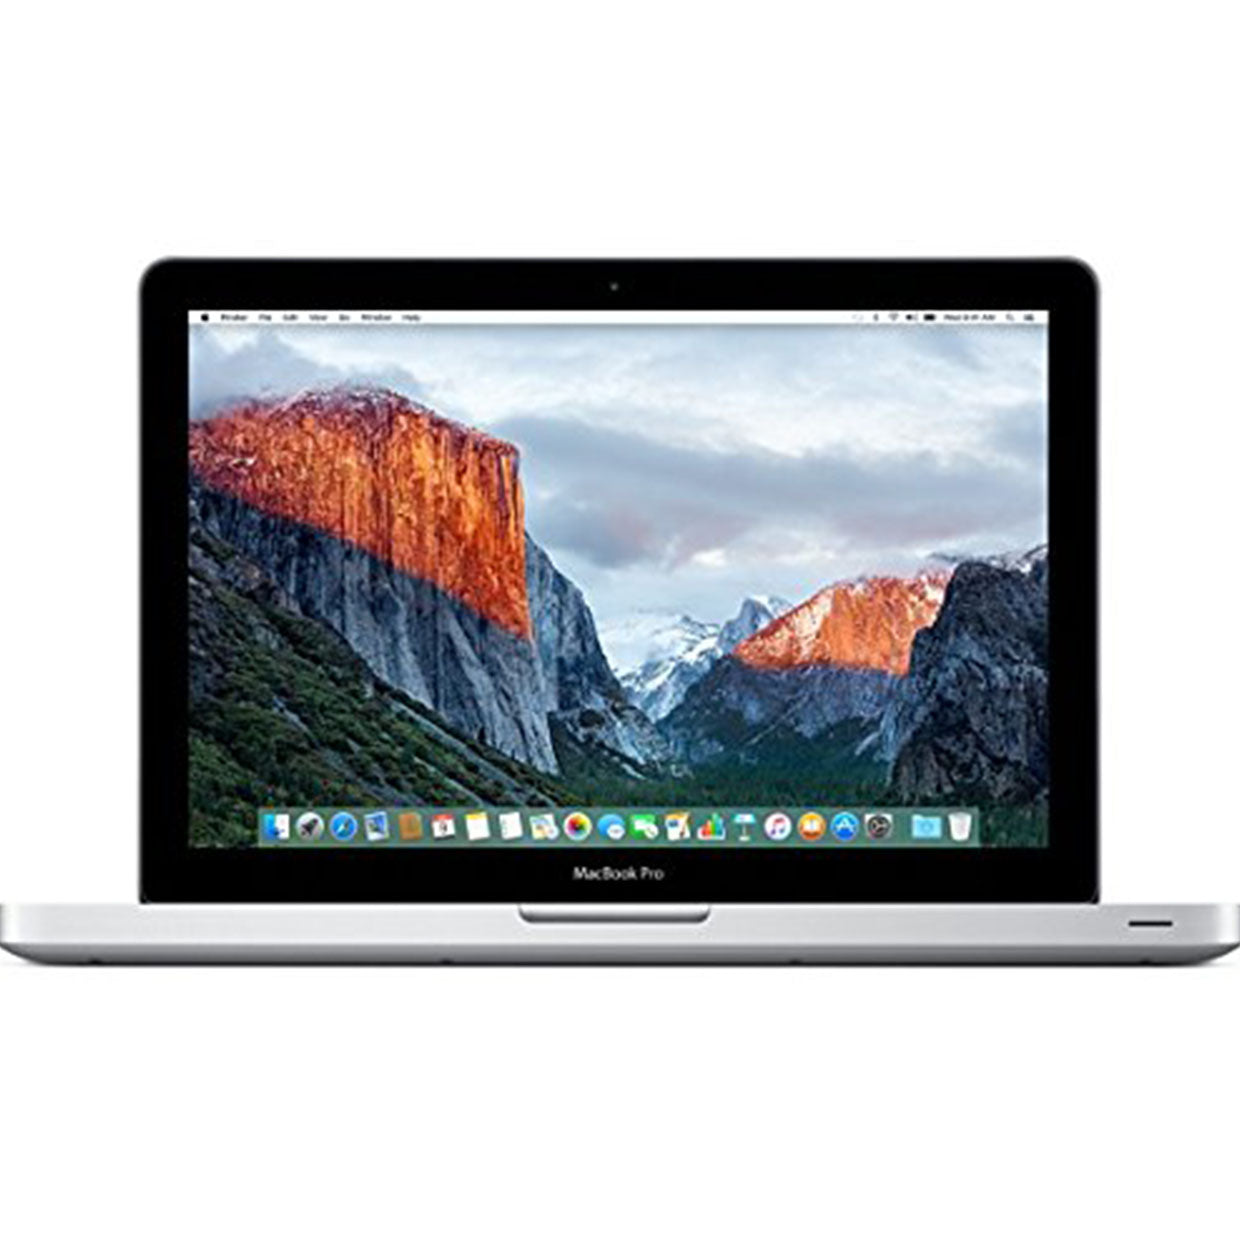 Apple Macbook Pro Laptop | A1278 2012 | 13.3 Inches Display | Core i5 | 8GB RAM |256GB SSD